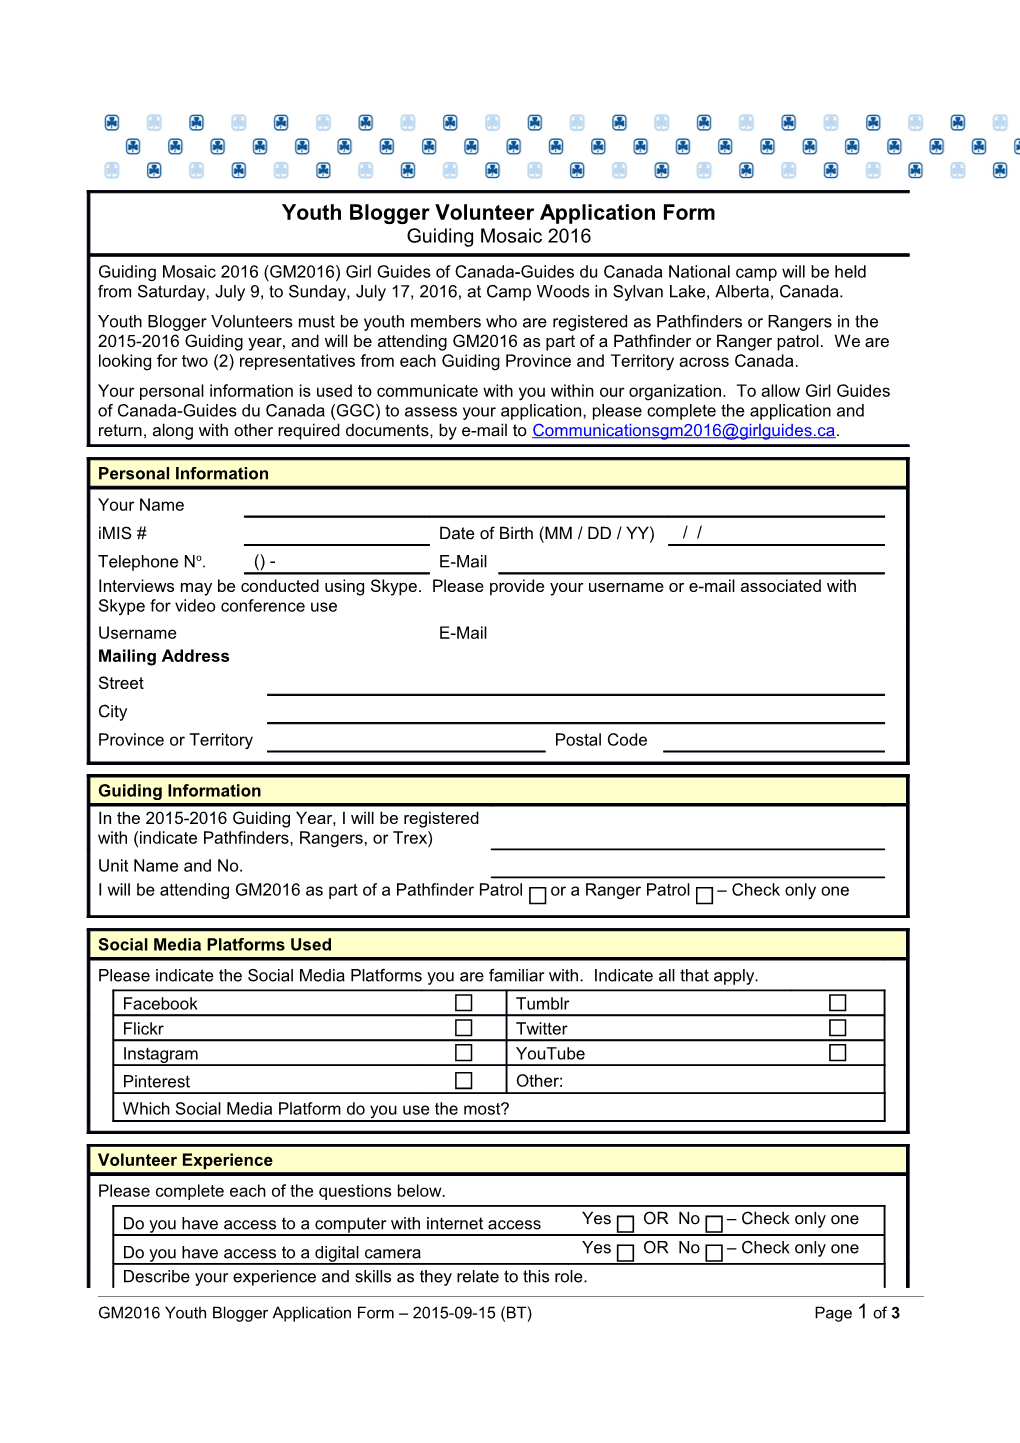 GM2016 Youth Blogger Application Form